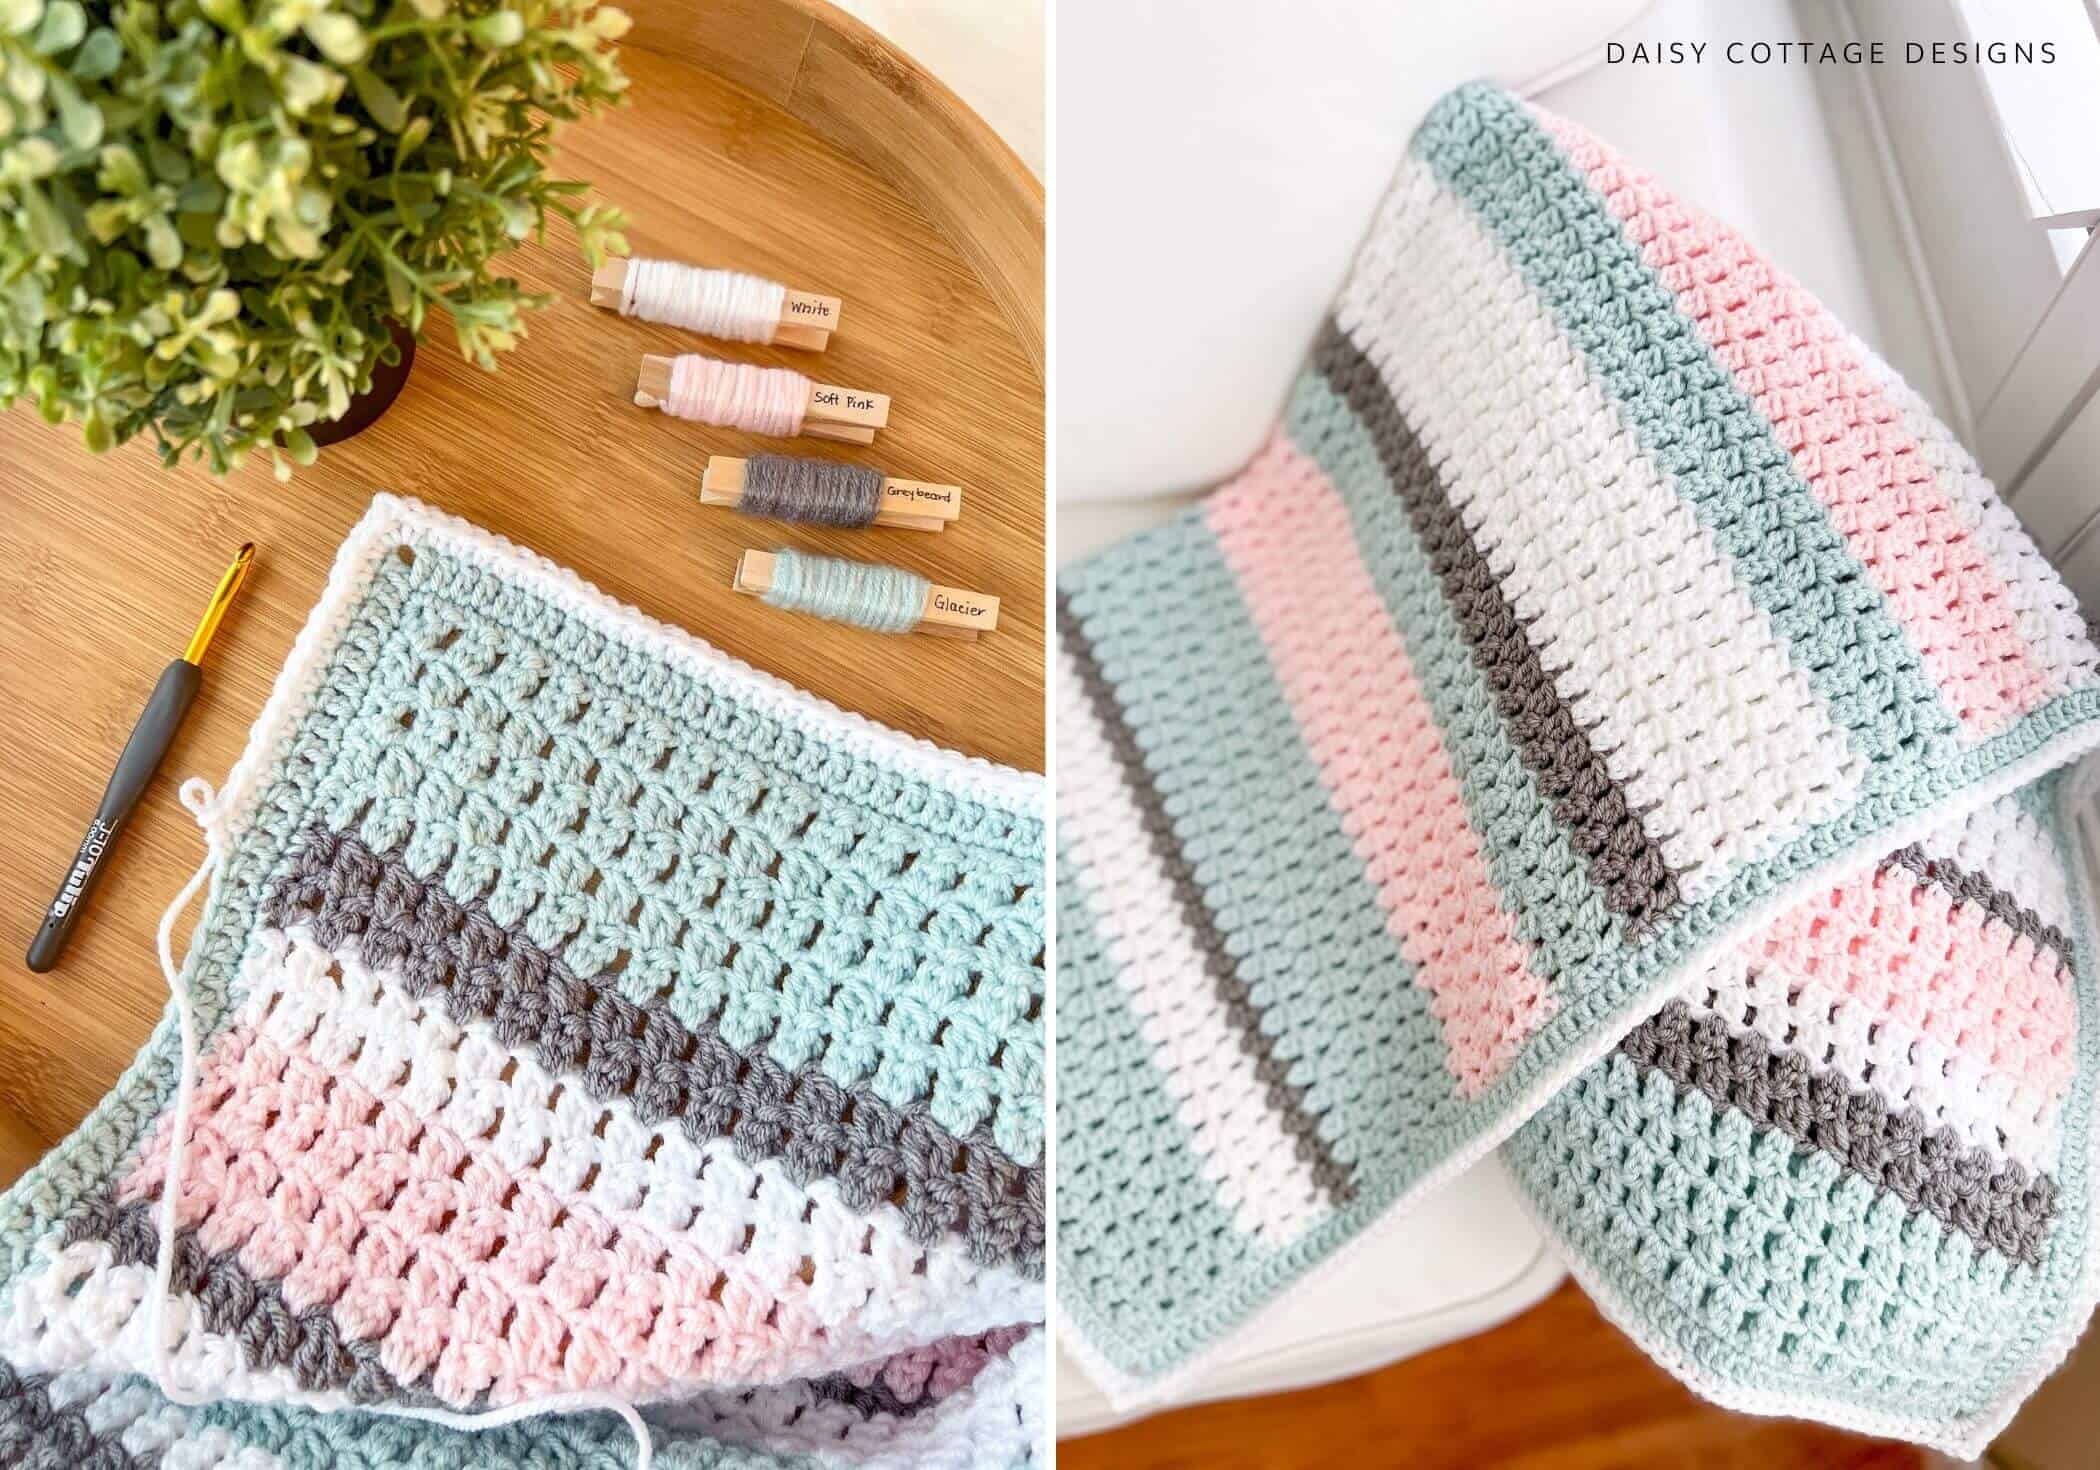 Cluster Stitch crochet pattern from Daisy Cottage Designs